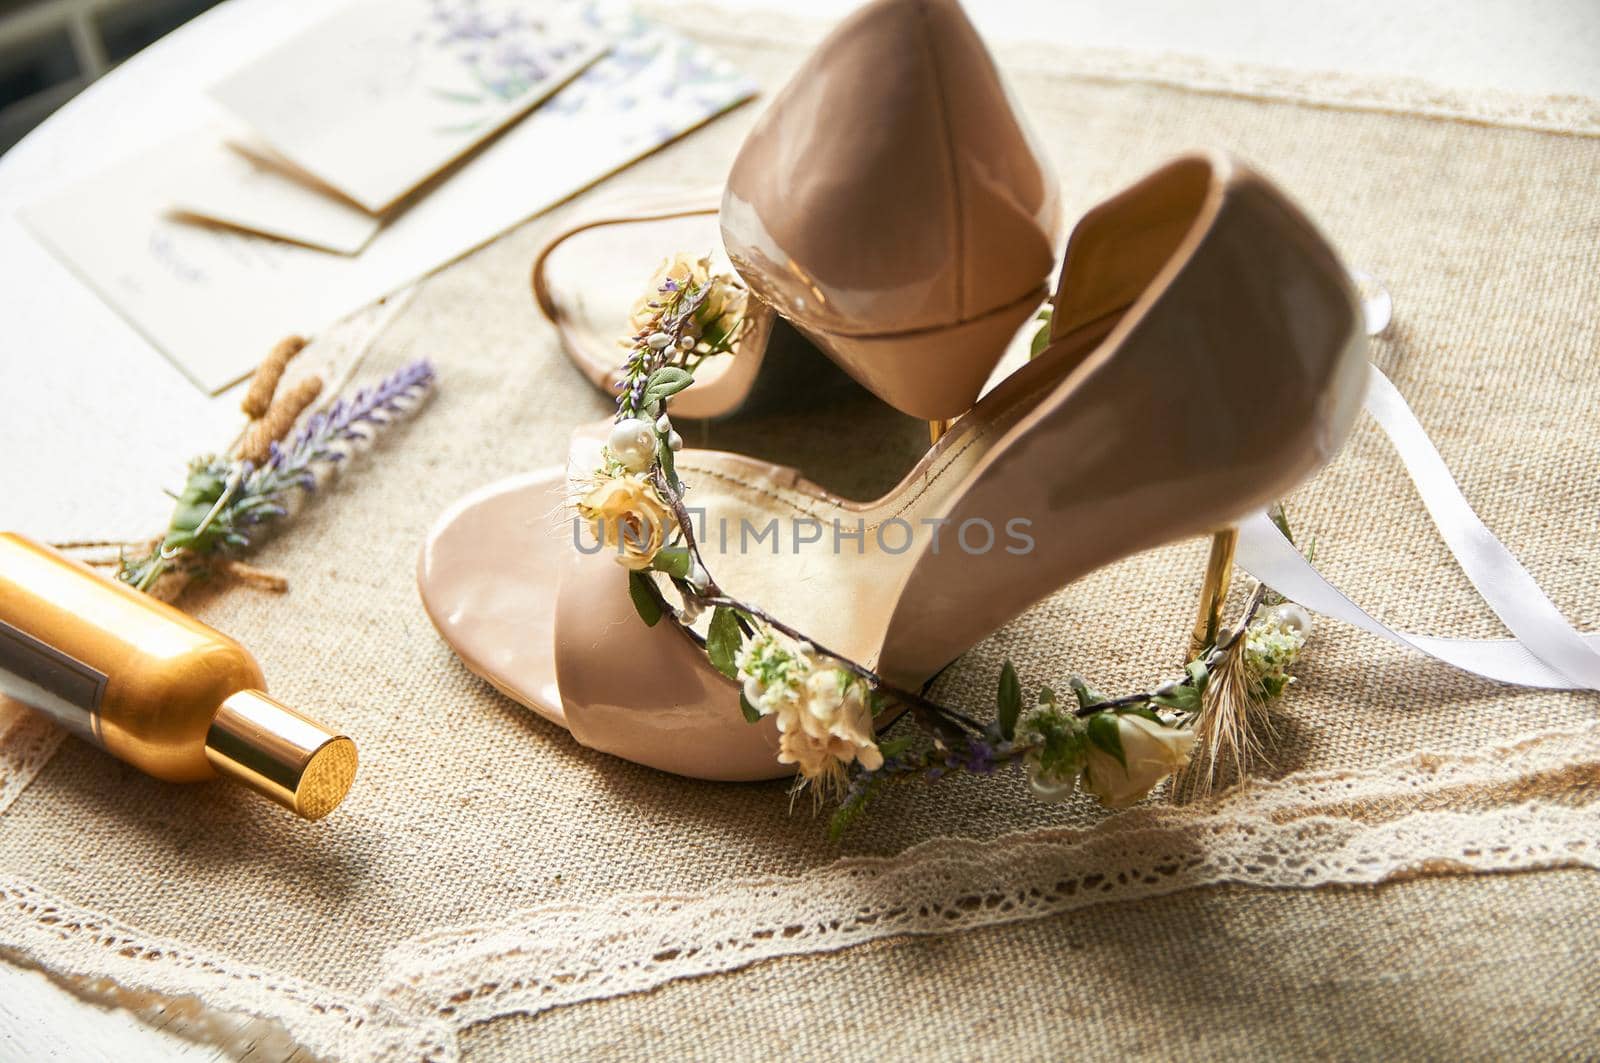 wedding shoes on a linen tablecloth table with a wreath of flowers for hair